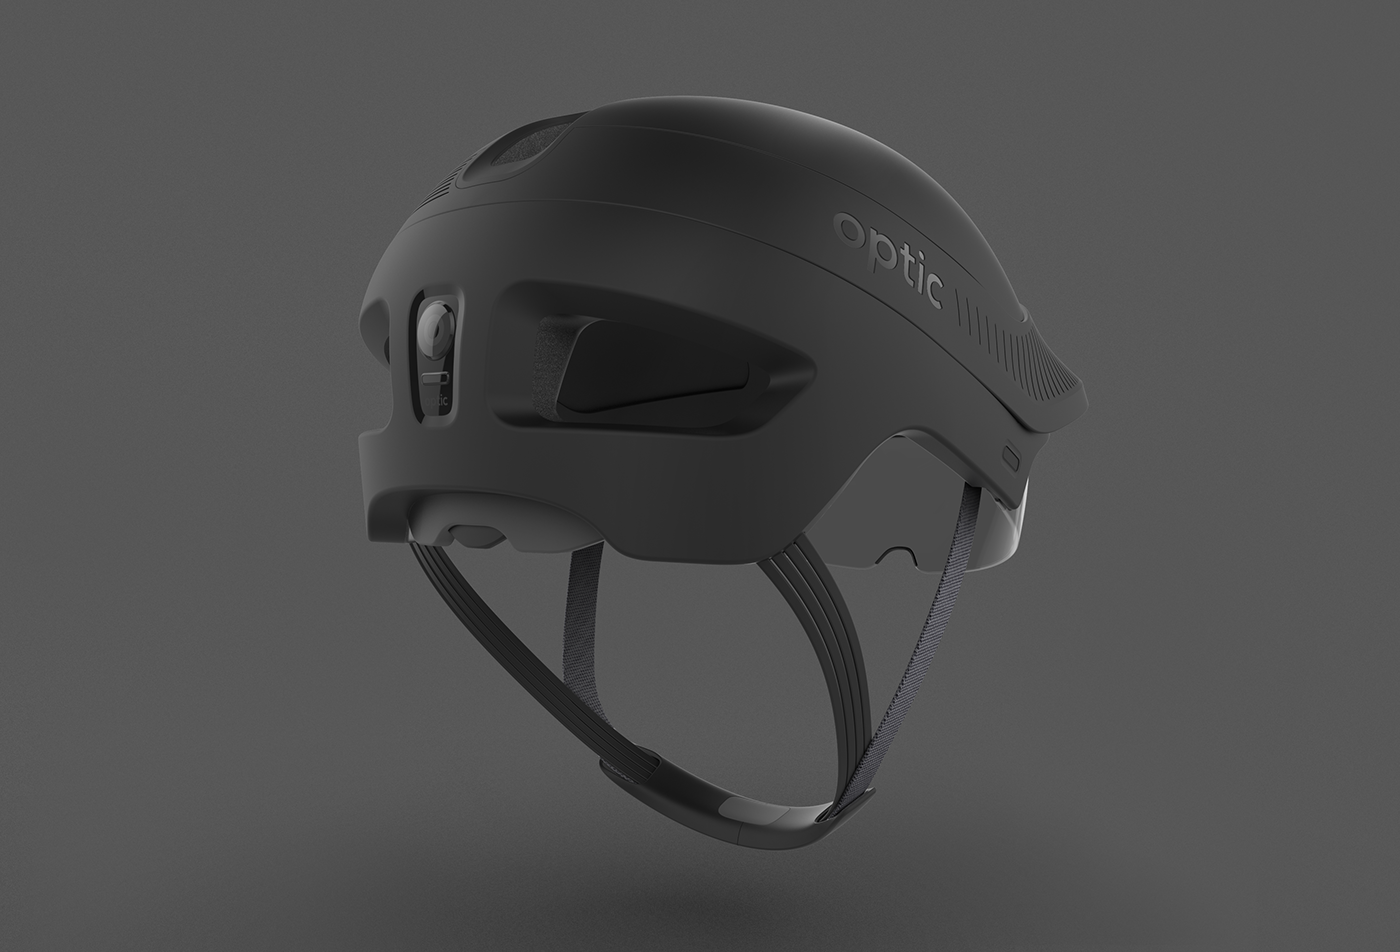 optic Cycling Helmet product design ux/ui augmented reality cmf industrial design  Red Dot